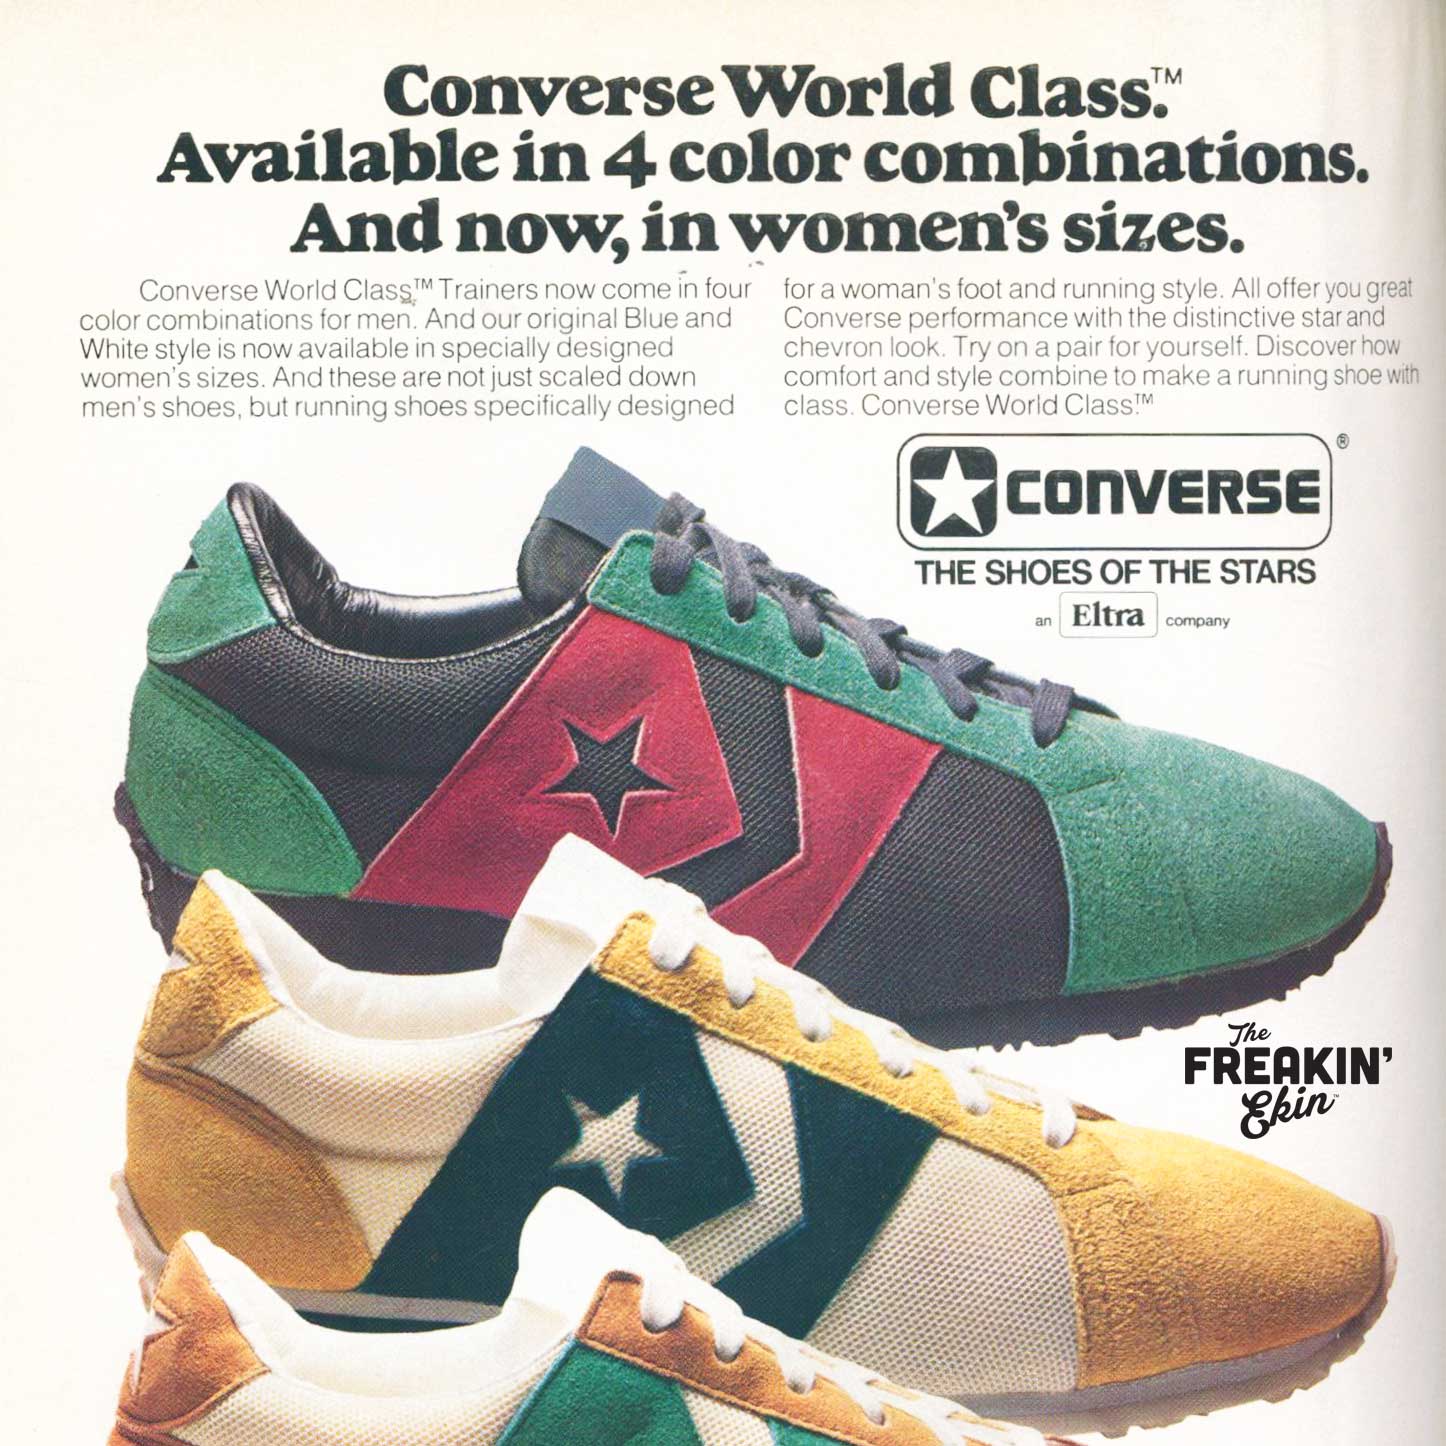 The Deffest®. A vintage and retro sneaker blog. — Converse World Class 1977  vintage sneaker ad